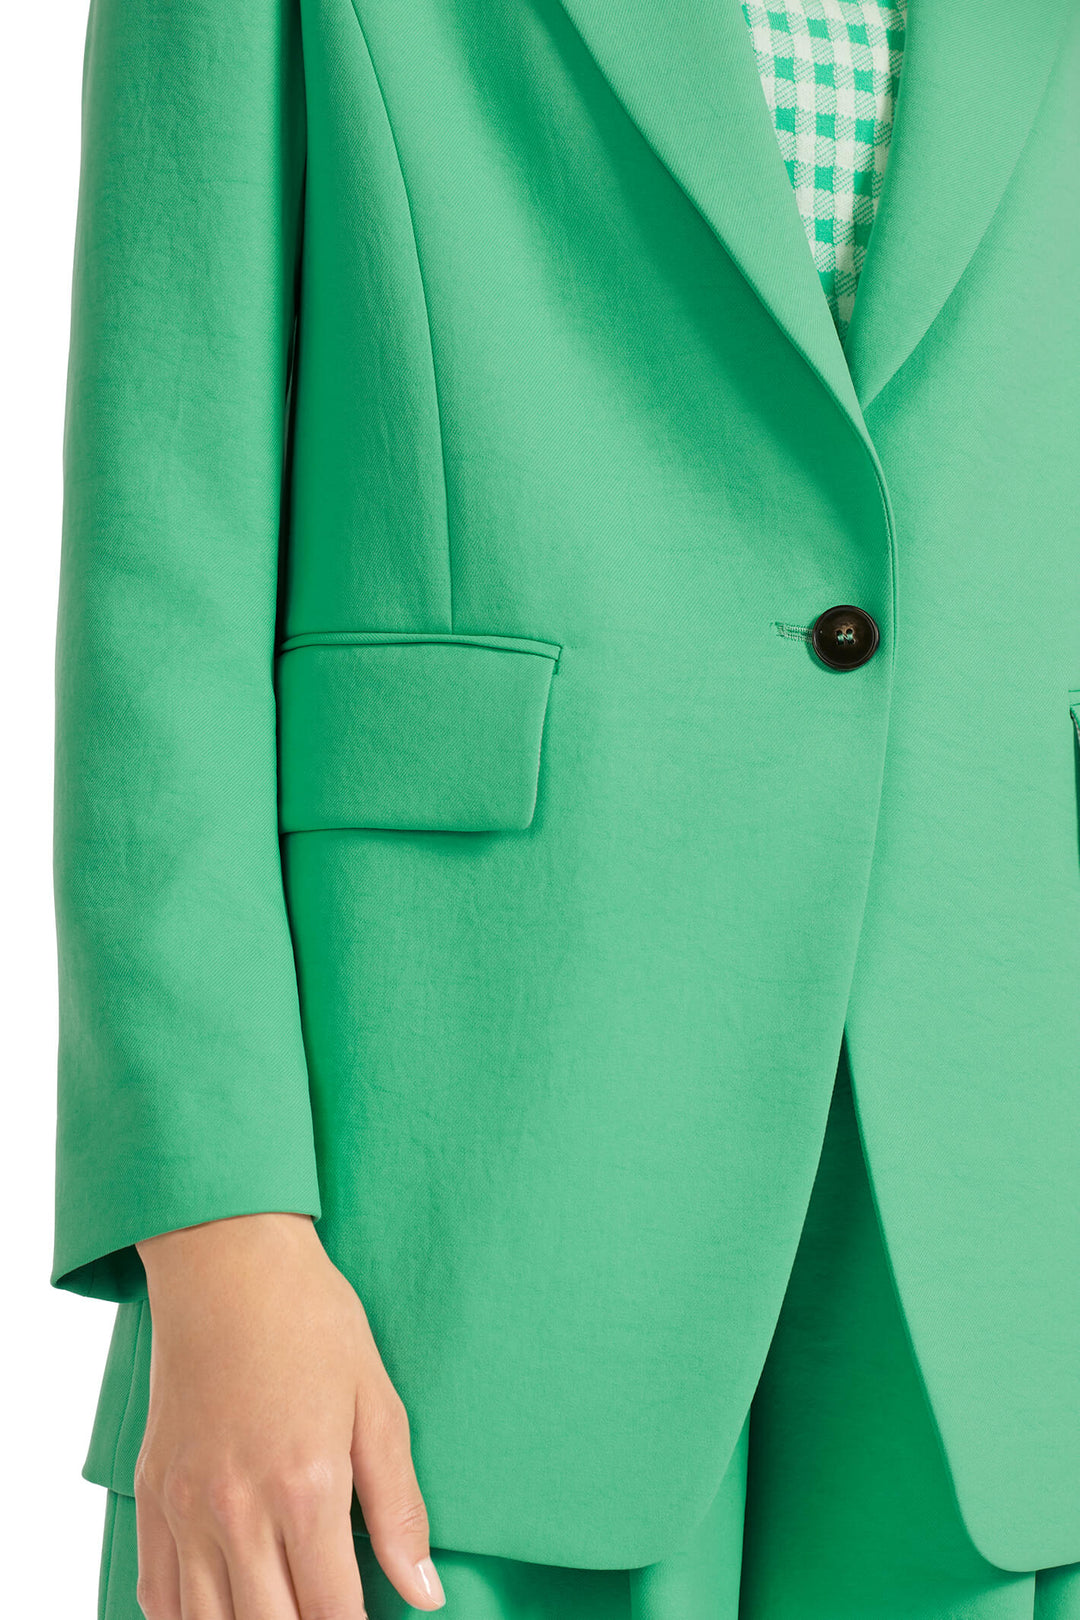 Marc Cain Collection UC 34.07 W03 Bright Jade Green Jacket - Olivia Grace Fashion